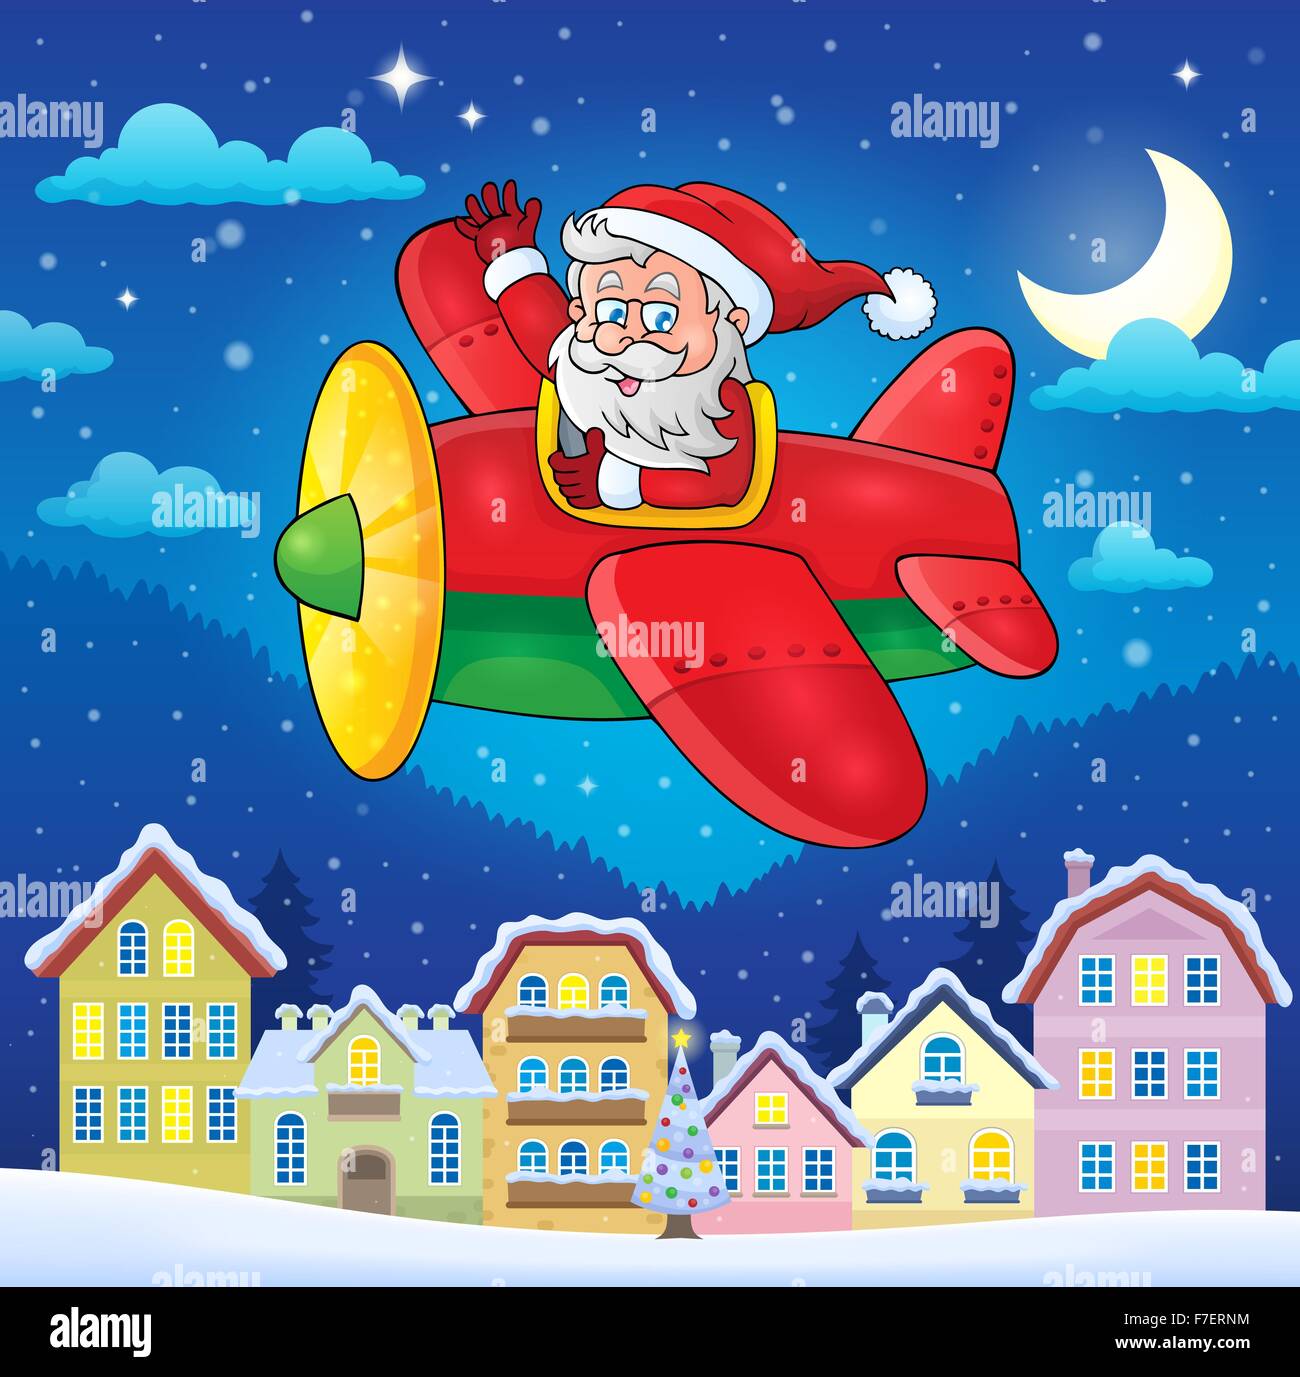 Christmas town with Santa Claus in plane picture illustration Stock Image